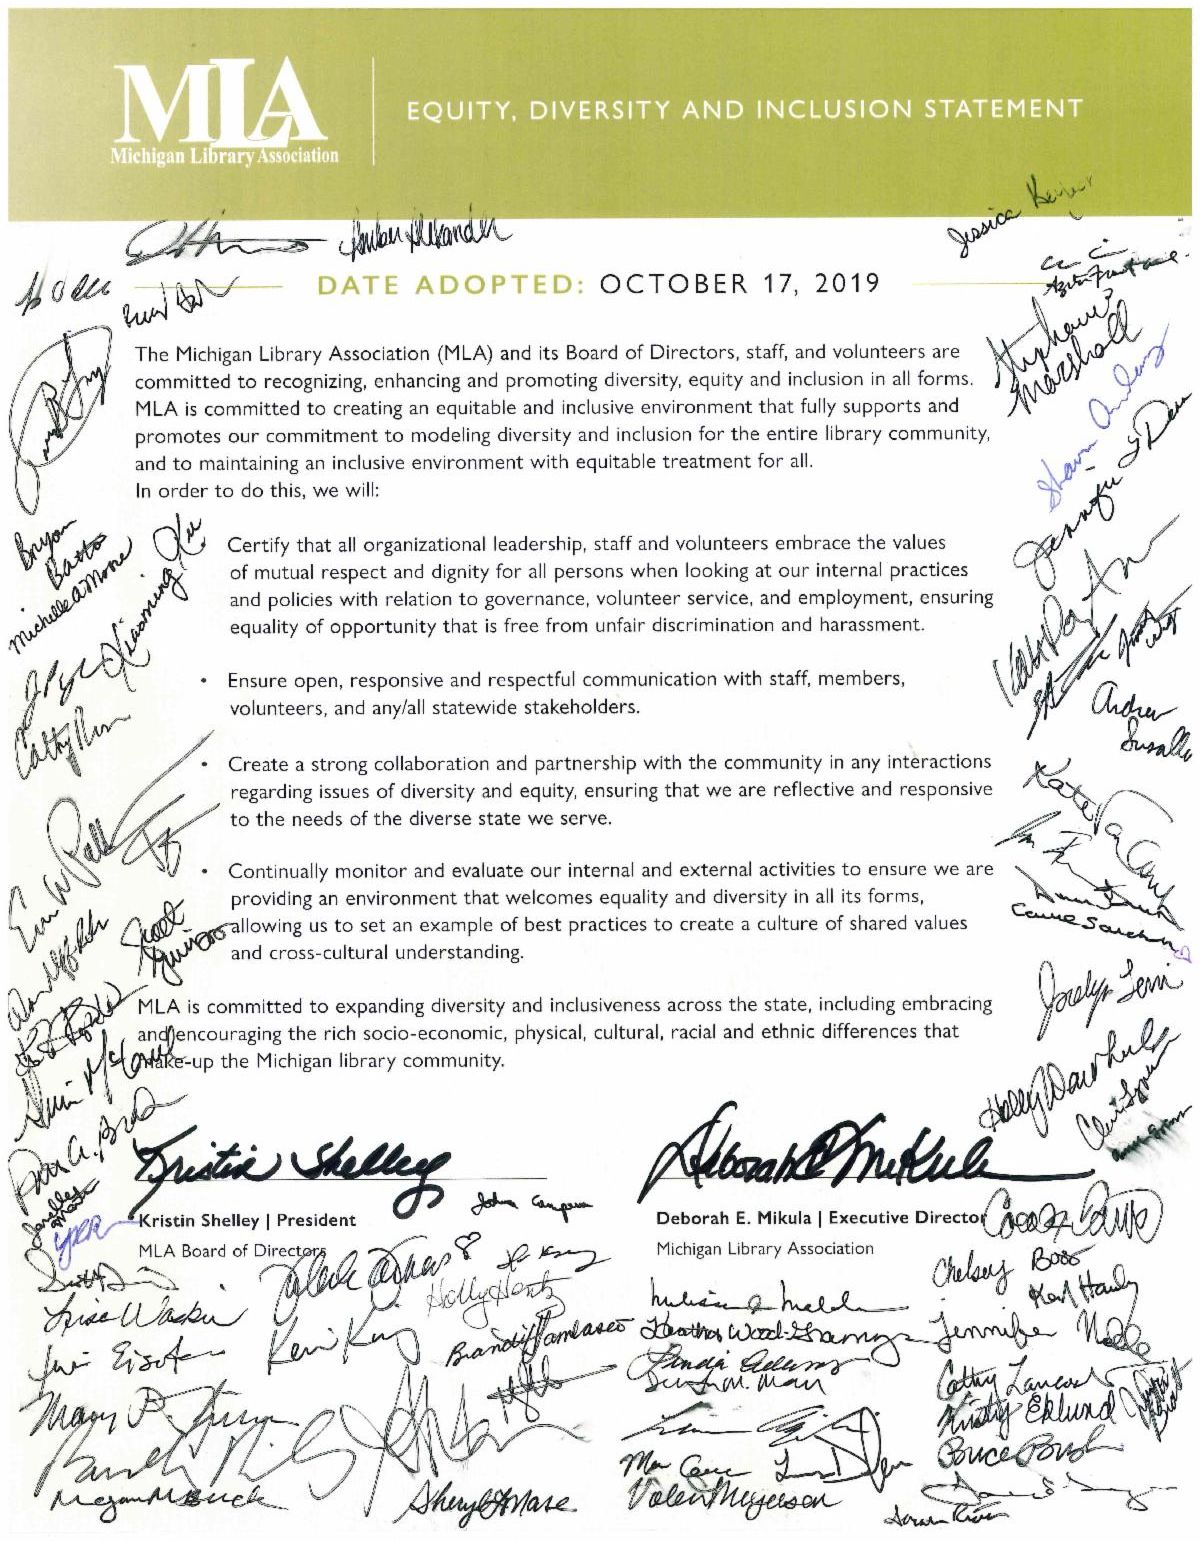 Image of a poster of the MLA equity, diversity and inclusion statement signed by MLA members